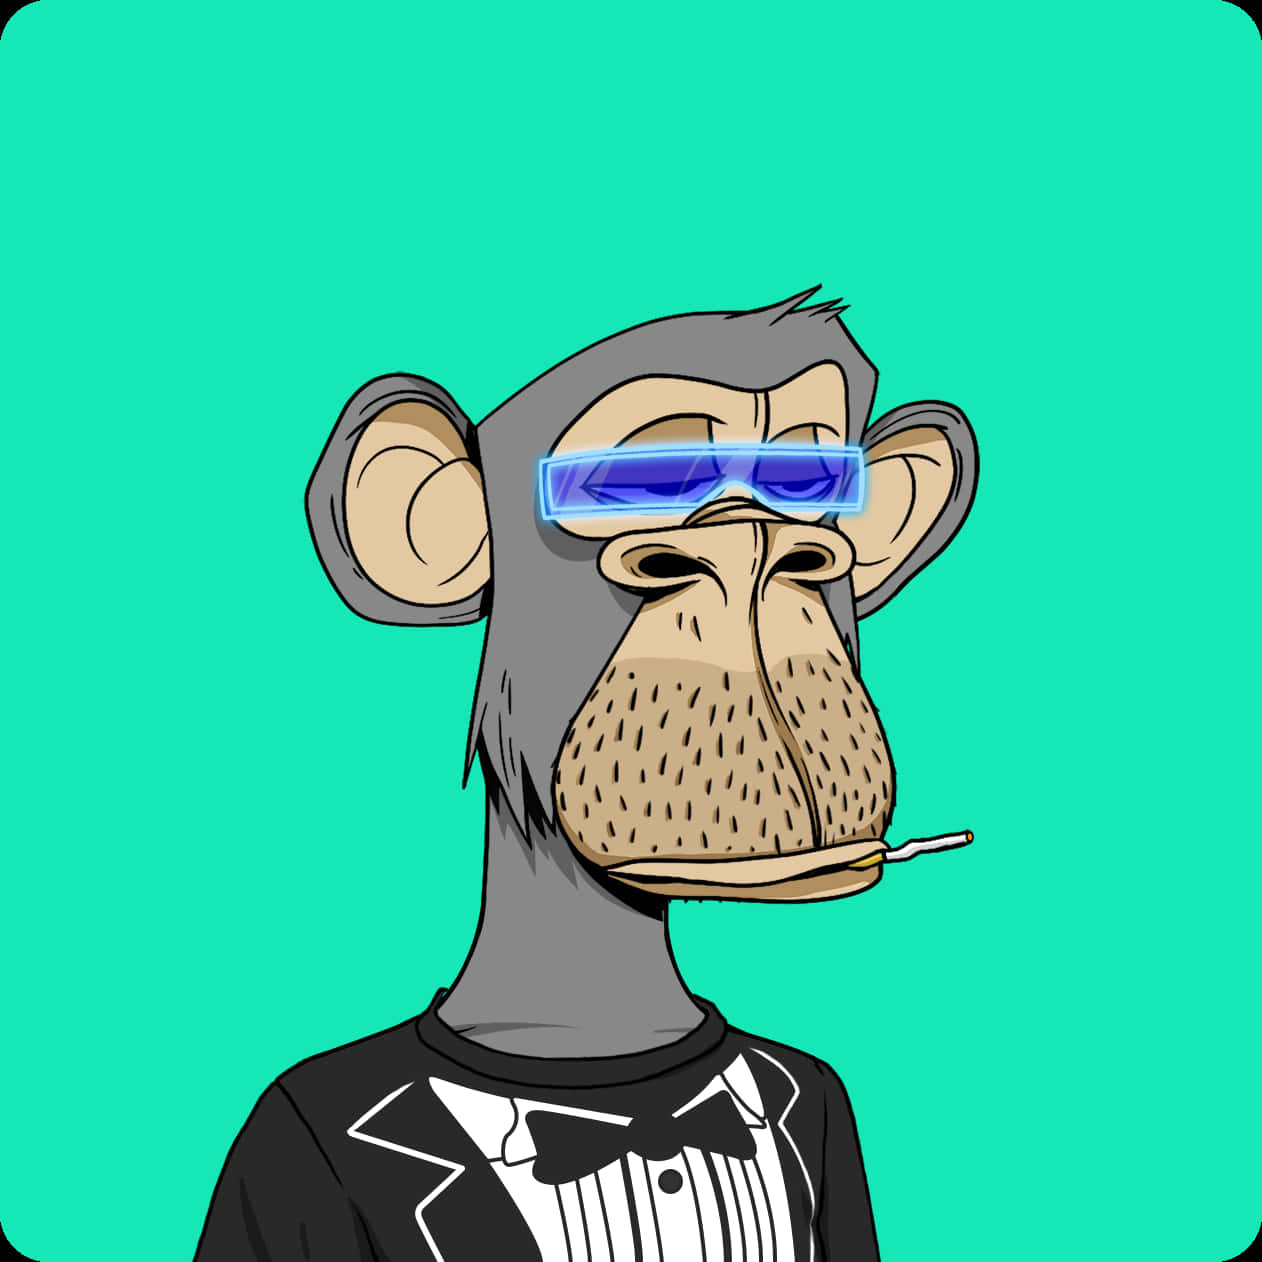 Cool Monkey wallpaper  Untitled Collection 60207488  OpenSea